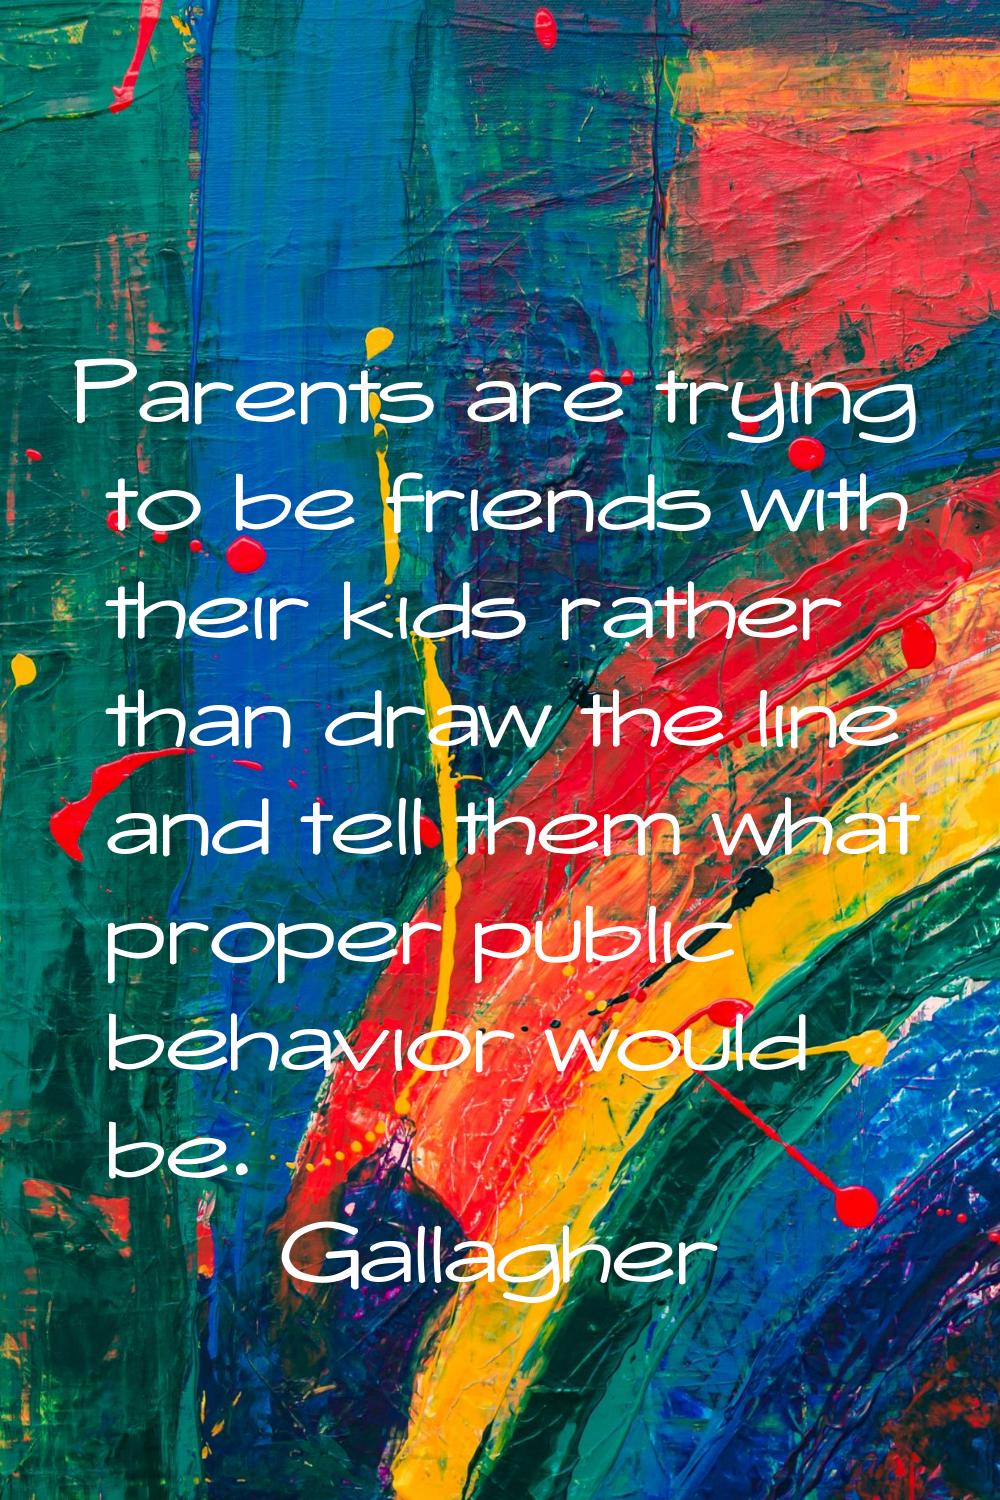 Parents are trying to be friends with their kids rather than draw the line and tell them what prope